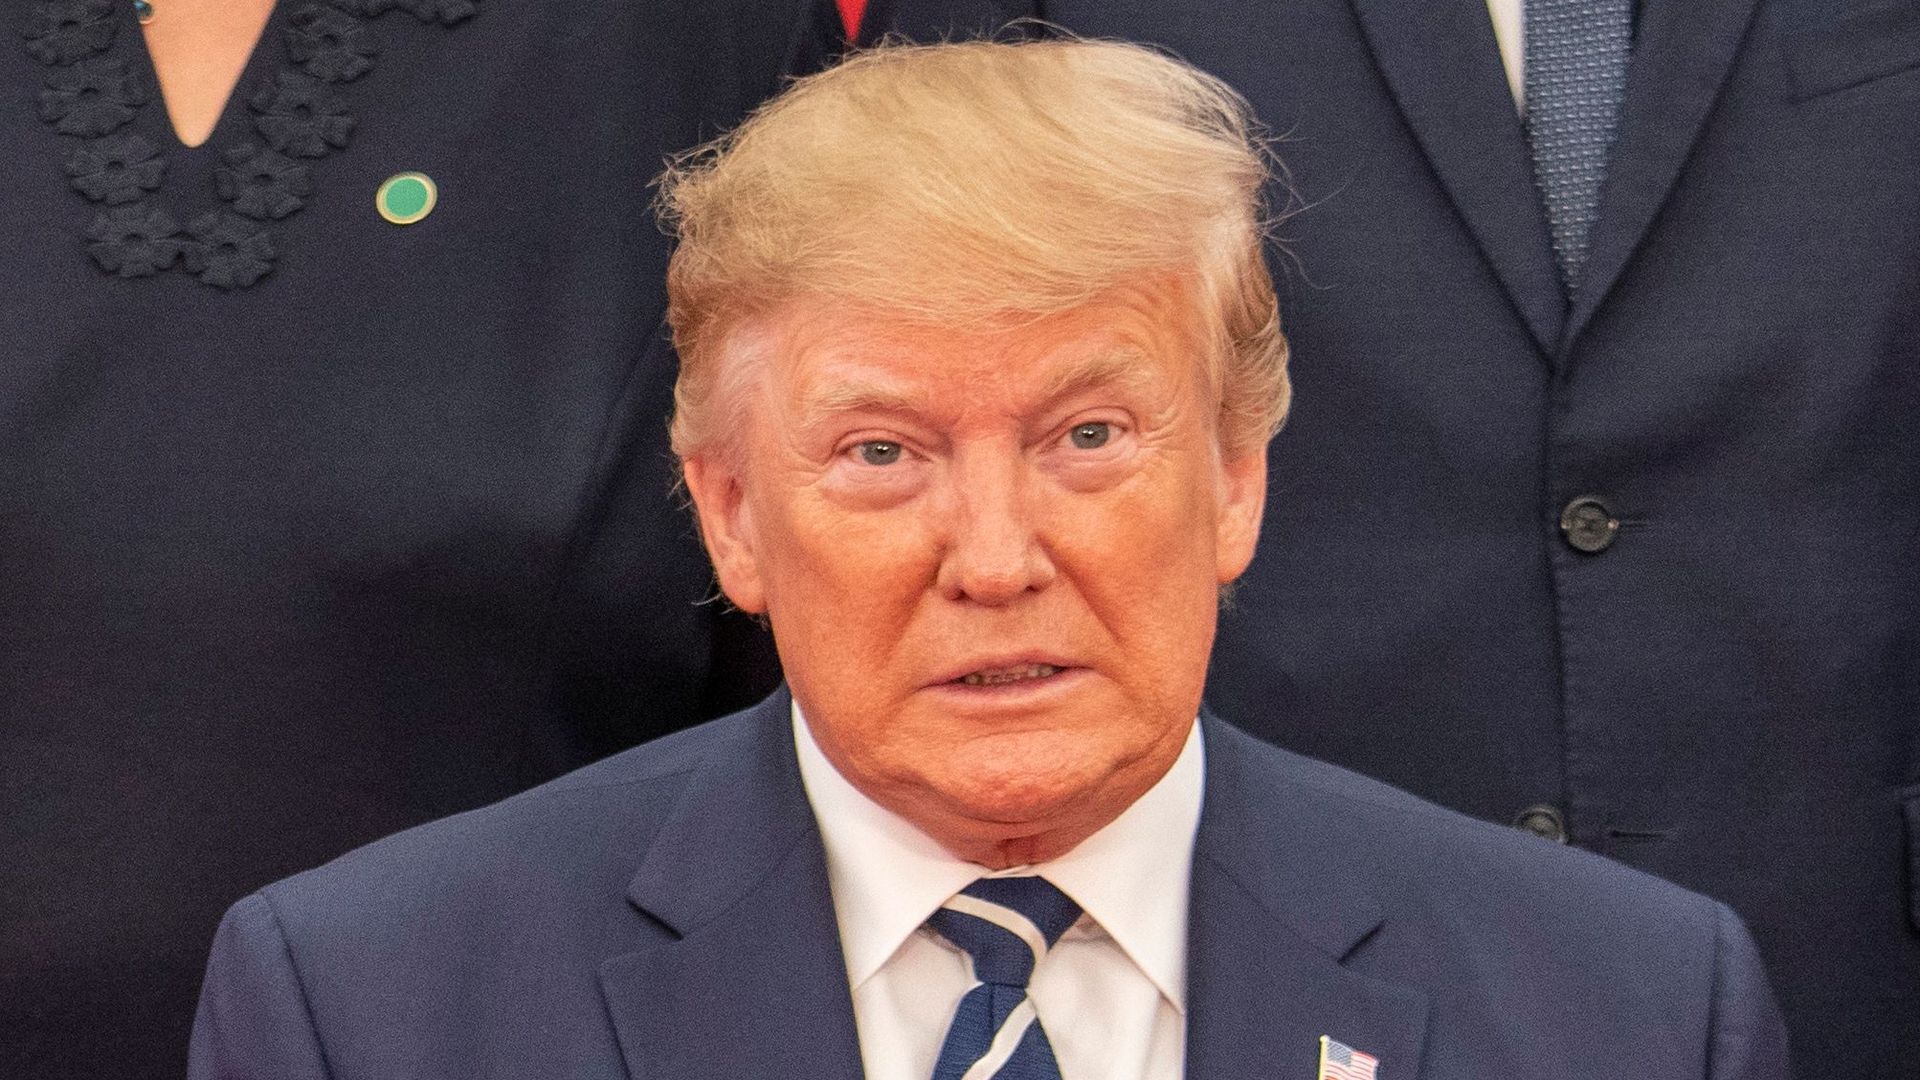 President Trump  during an event to commemorate the 75th anniversary of the D-Day landings, in Portsmouth, southern England, on June 5, 2019.